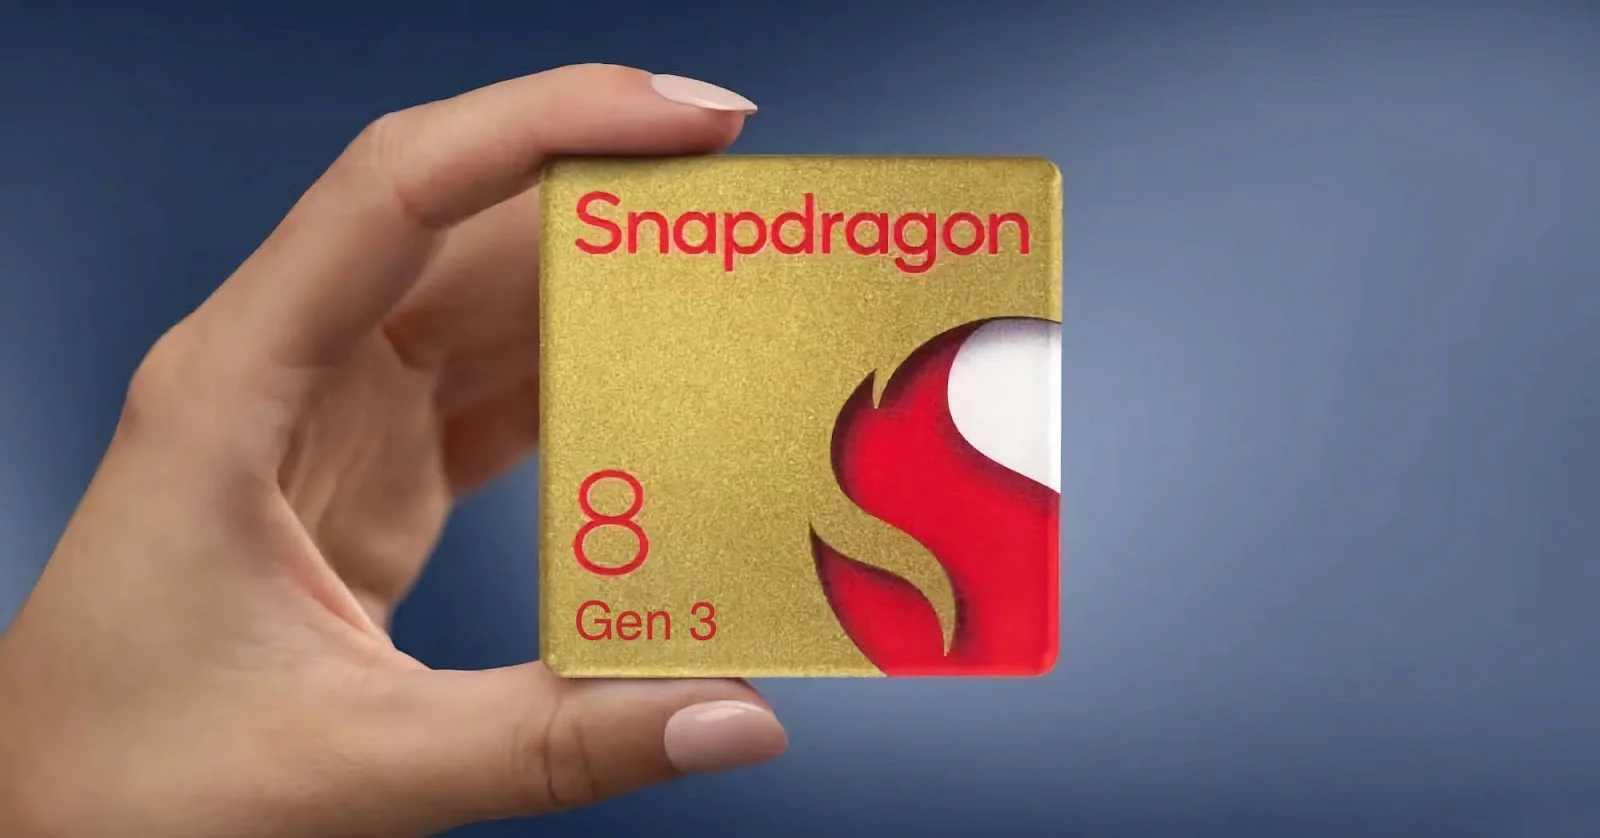 The Snapdragon 8 Gen 3 graphics core significantly outperformed its predecessor in the benchmark